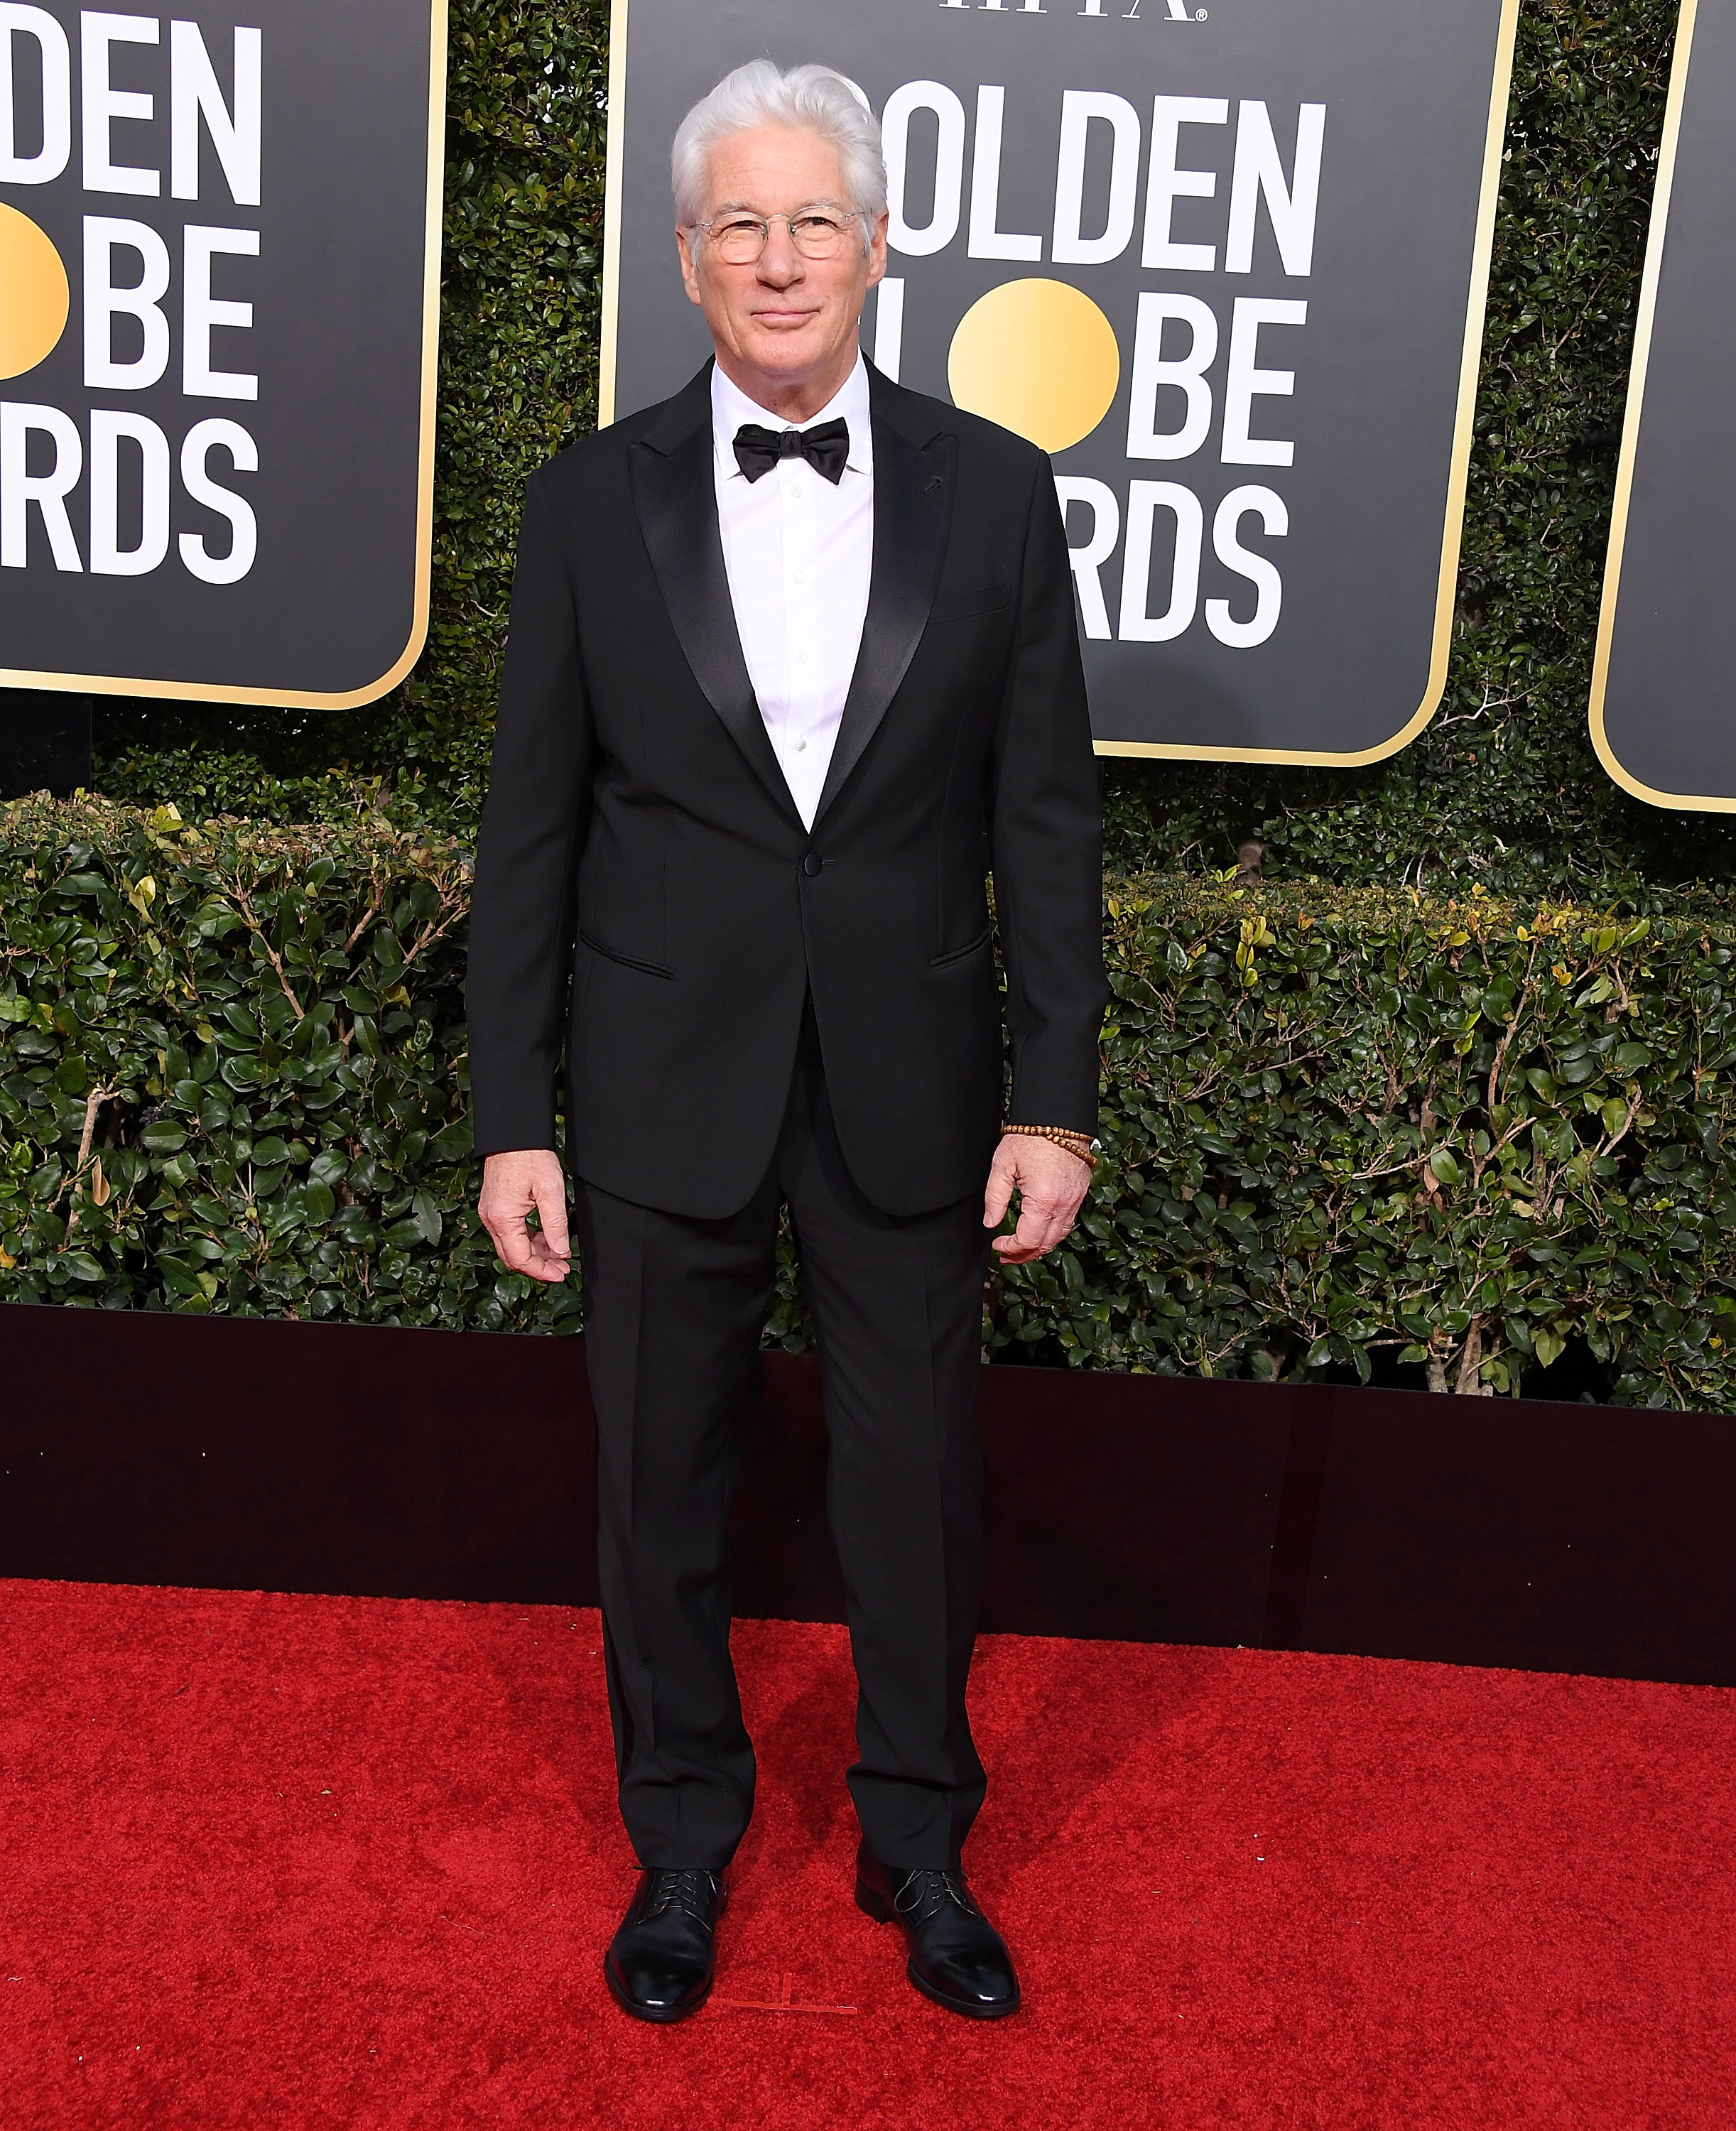 Richard Gere at the 76th Annual Golden Globe Awards in Beverly Hills, California on January 6, 2019 | Source: Getty Images